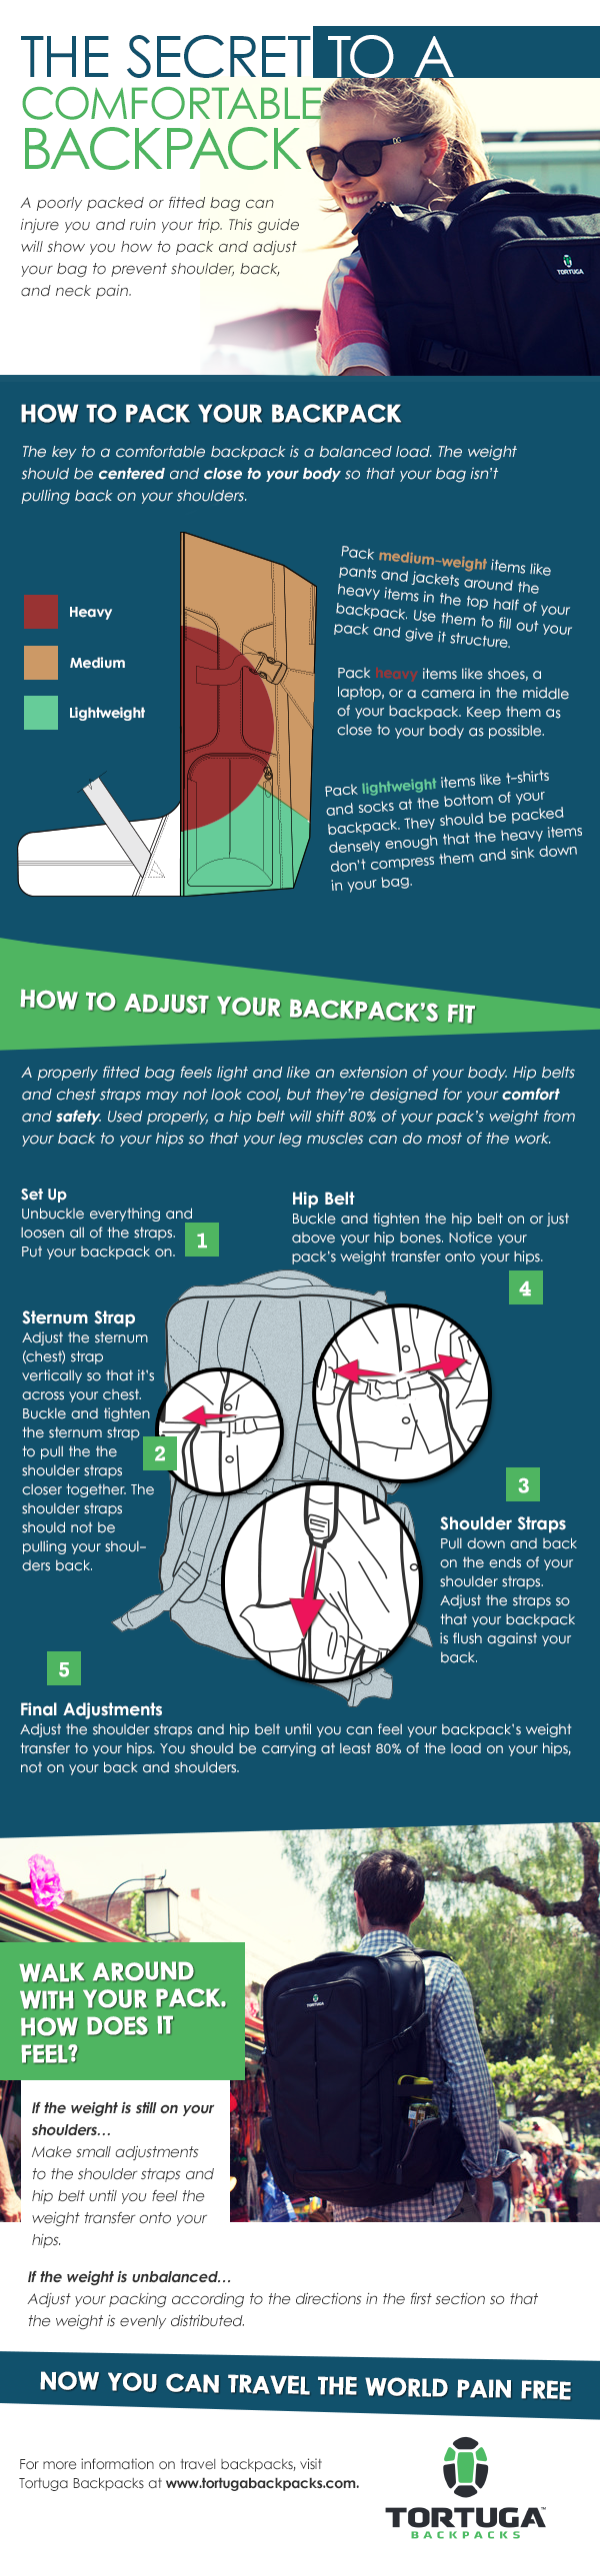 The Secret to a Comfortable Backpack